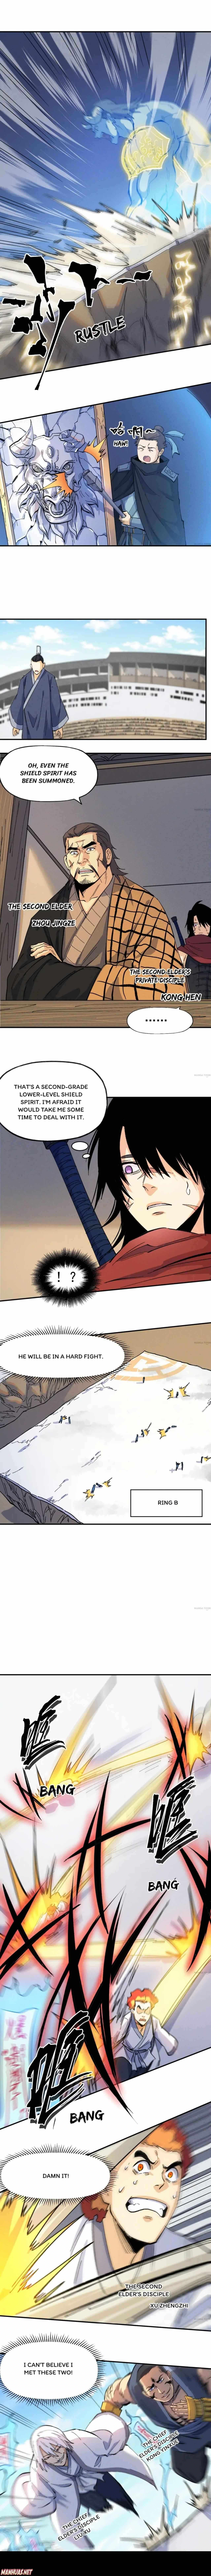 The Strongest Protagonist Of All Time! - Page 1